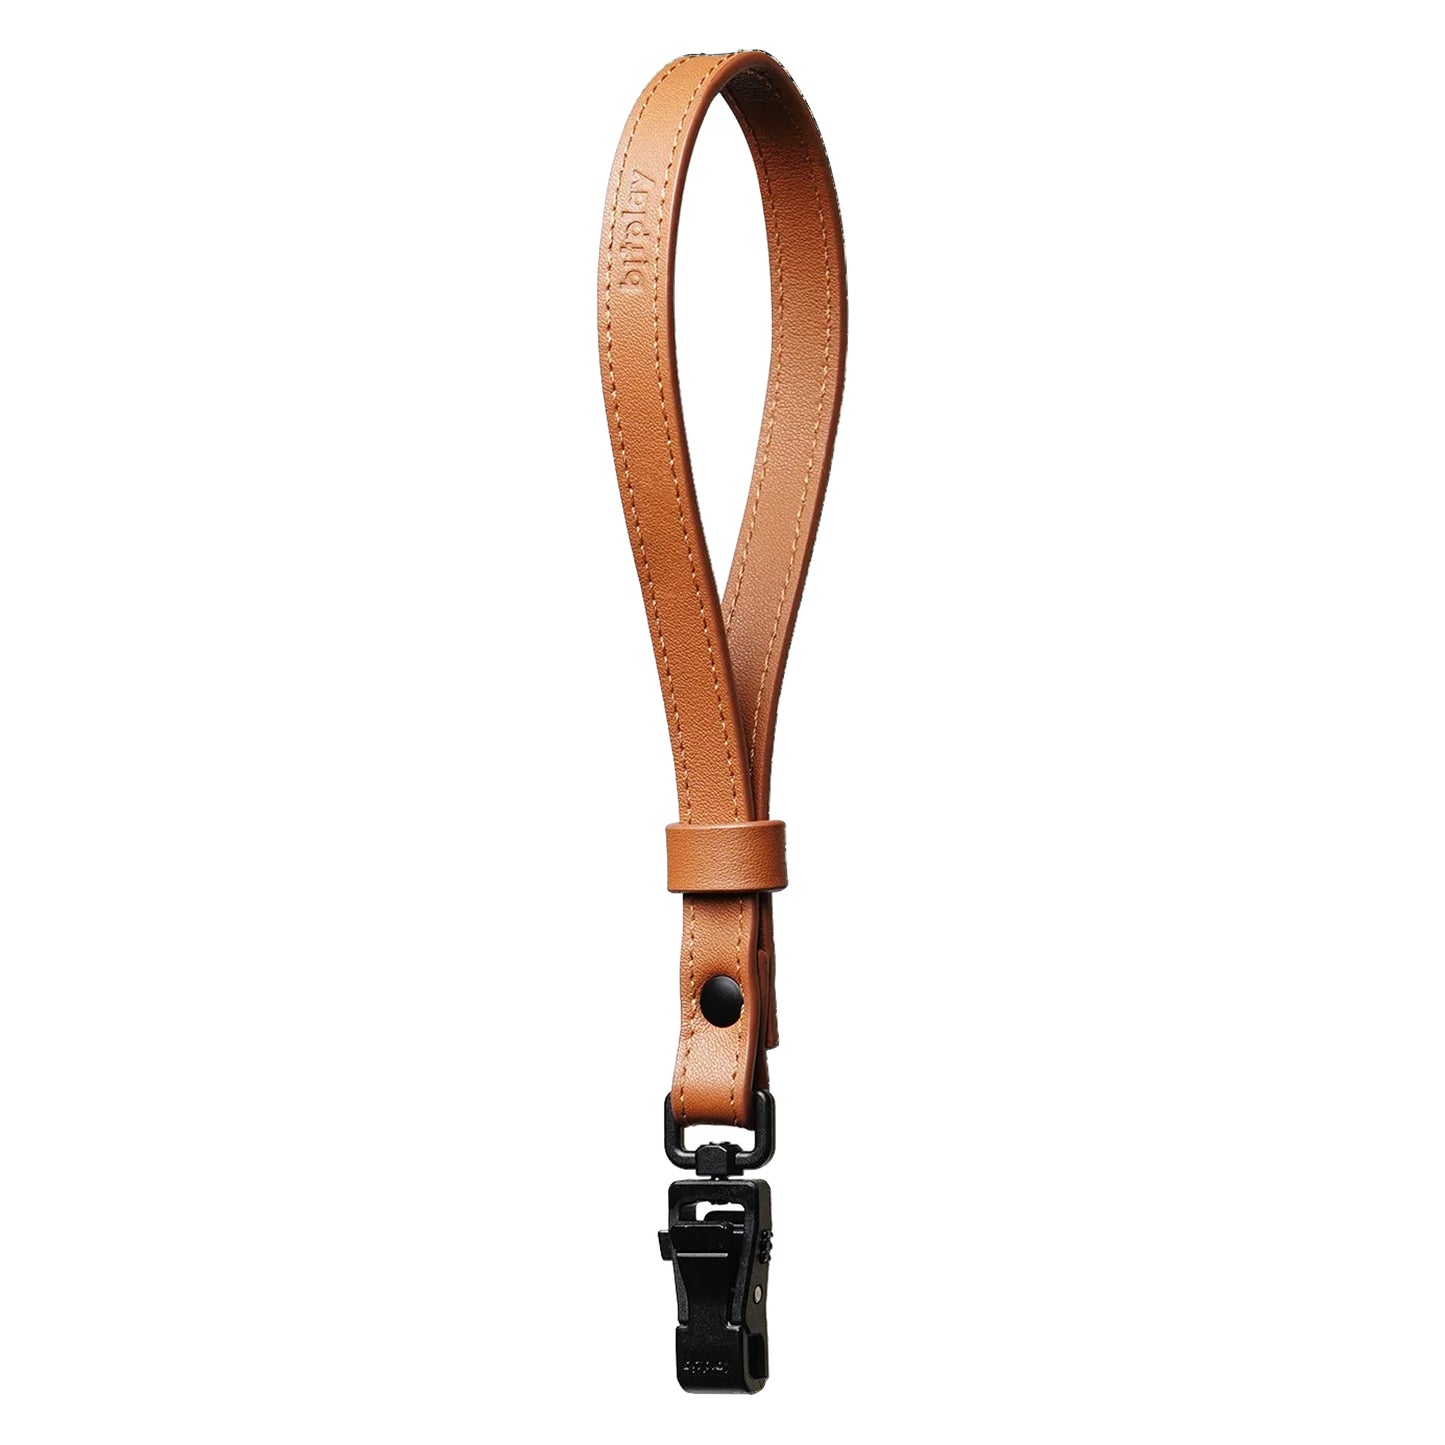 Bitplay Genuine Leather Wrist Strap 12mm Lanyard - Strap Adapter Included